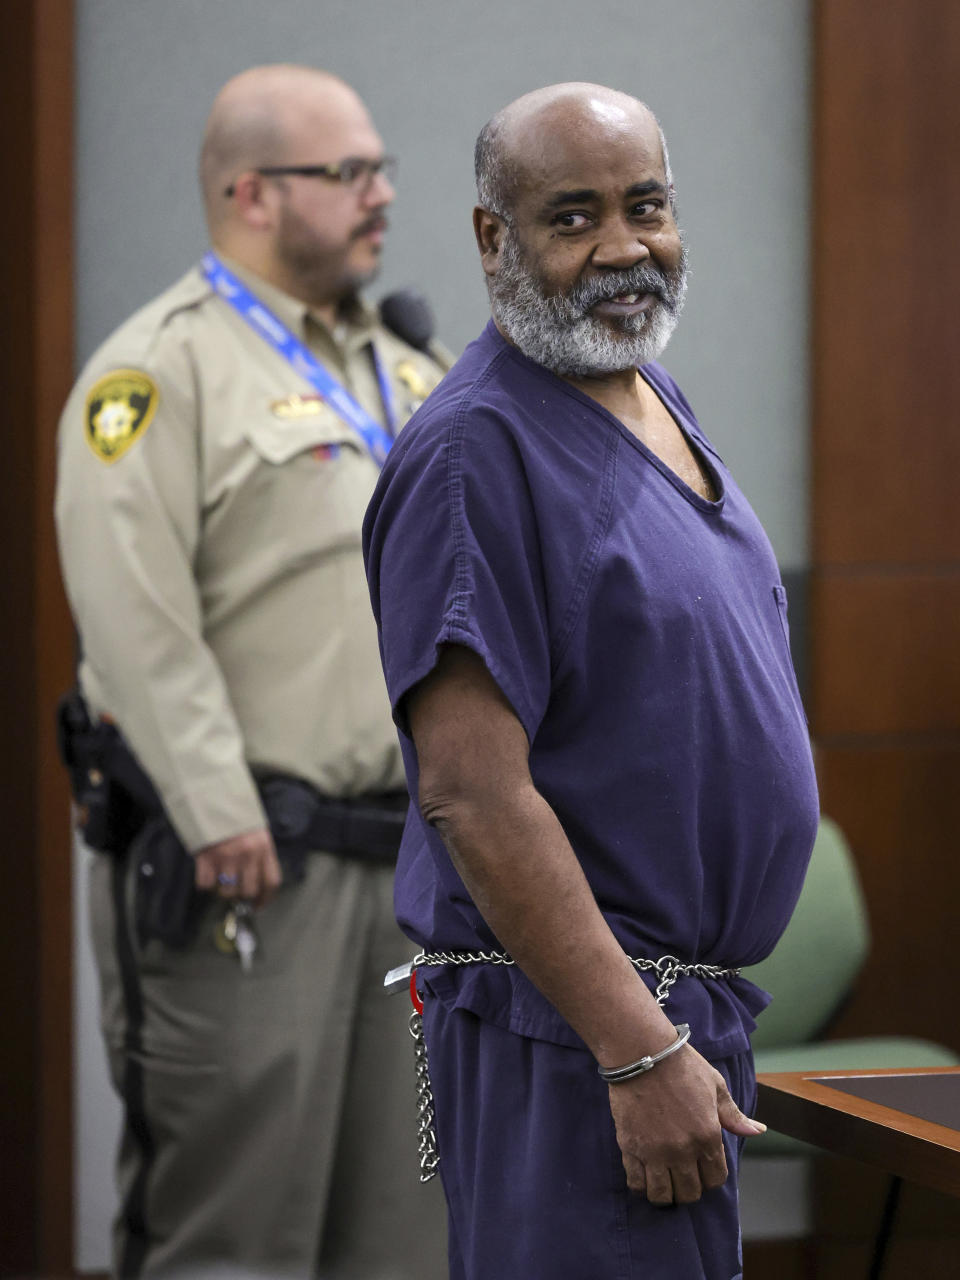 Duane Keith “Keffe D” Davis appears for his arraignment at the Regional Justice Center, Thursday, Nov. 2, 2023, in Las Vegas. Davis, a former Southern California street gang leader, pleaded not guilty Thursday to orchestrating a drive-by shooting that killed Tupac Shakur in 1996 in Las Vegas. (Ethan Miller/Pool Photo via AP)